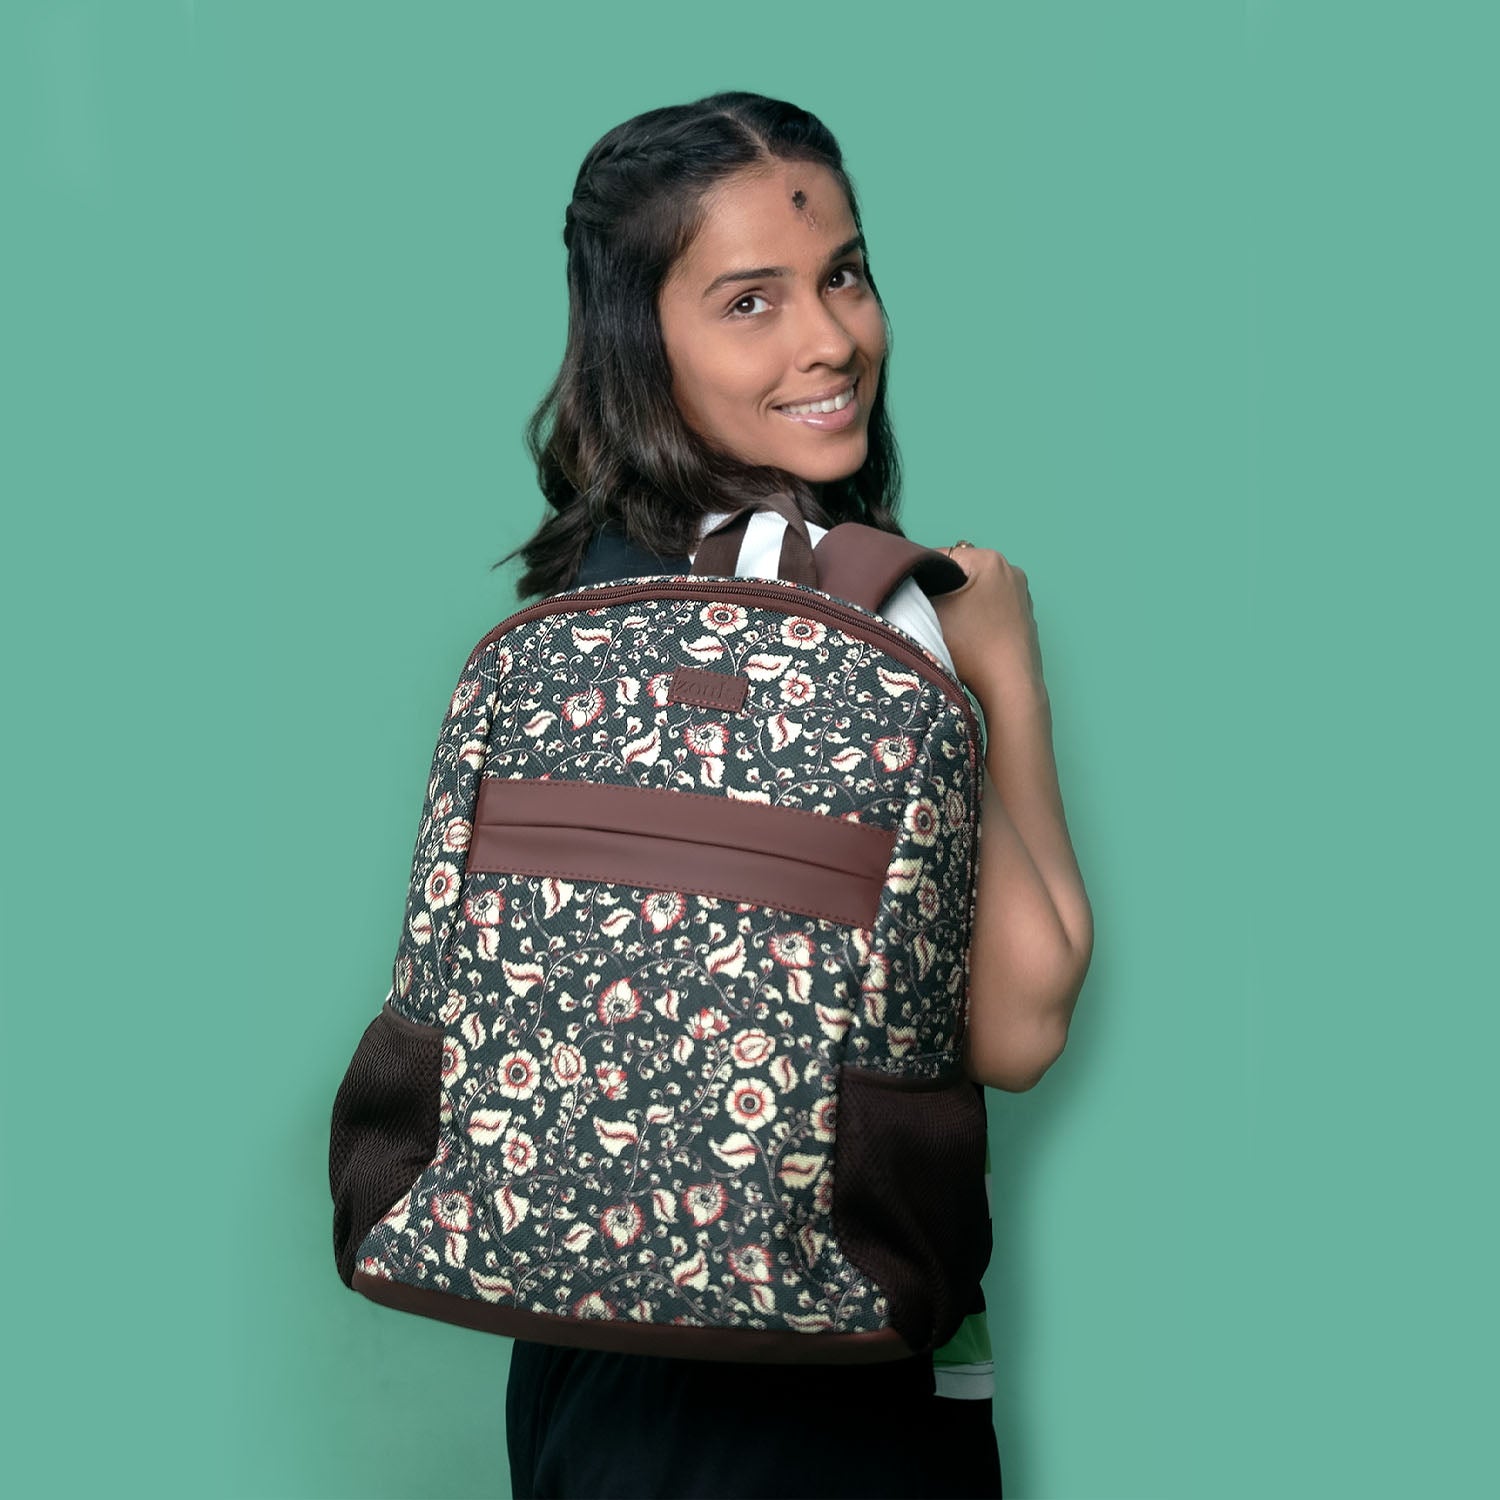 Backpacks online: Buy trendy bags & backpacks at up to 70% off on Amazon.in